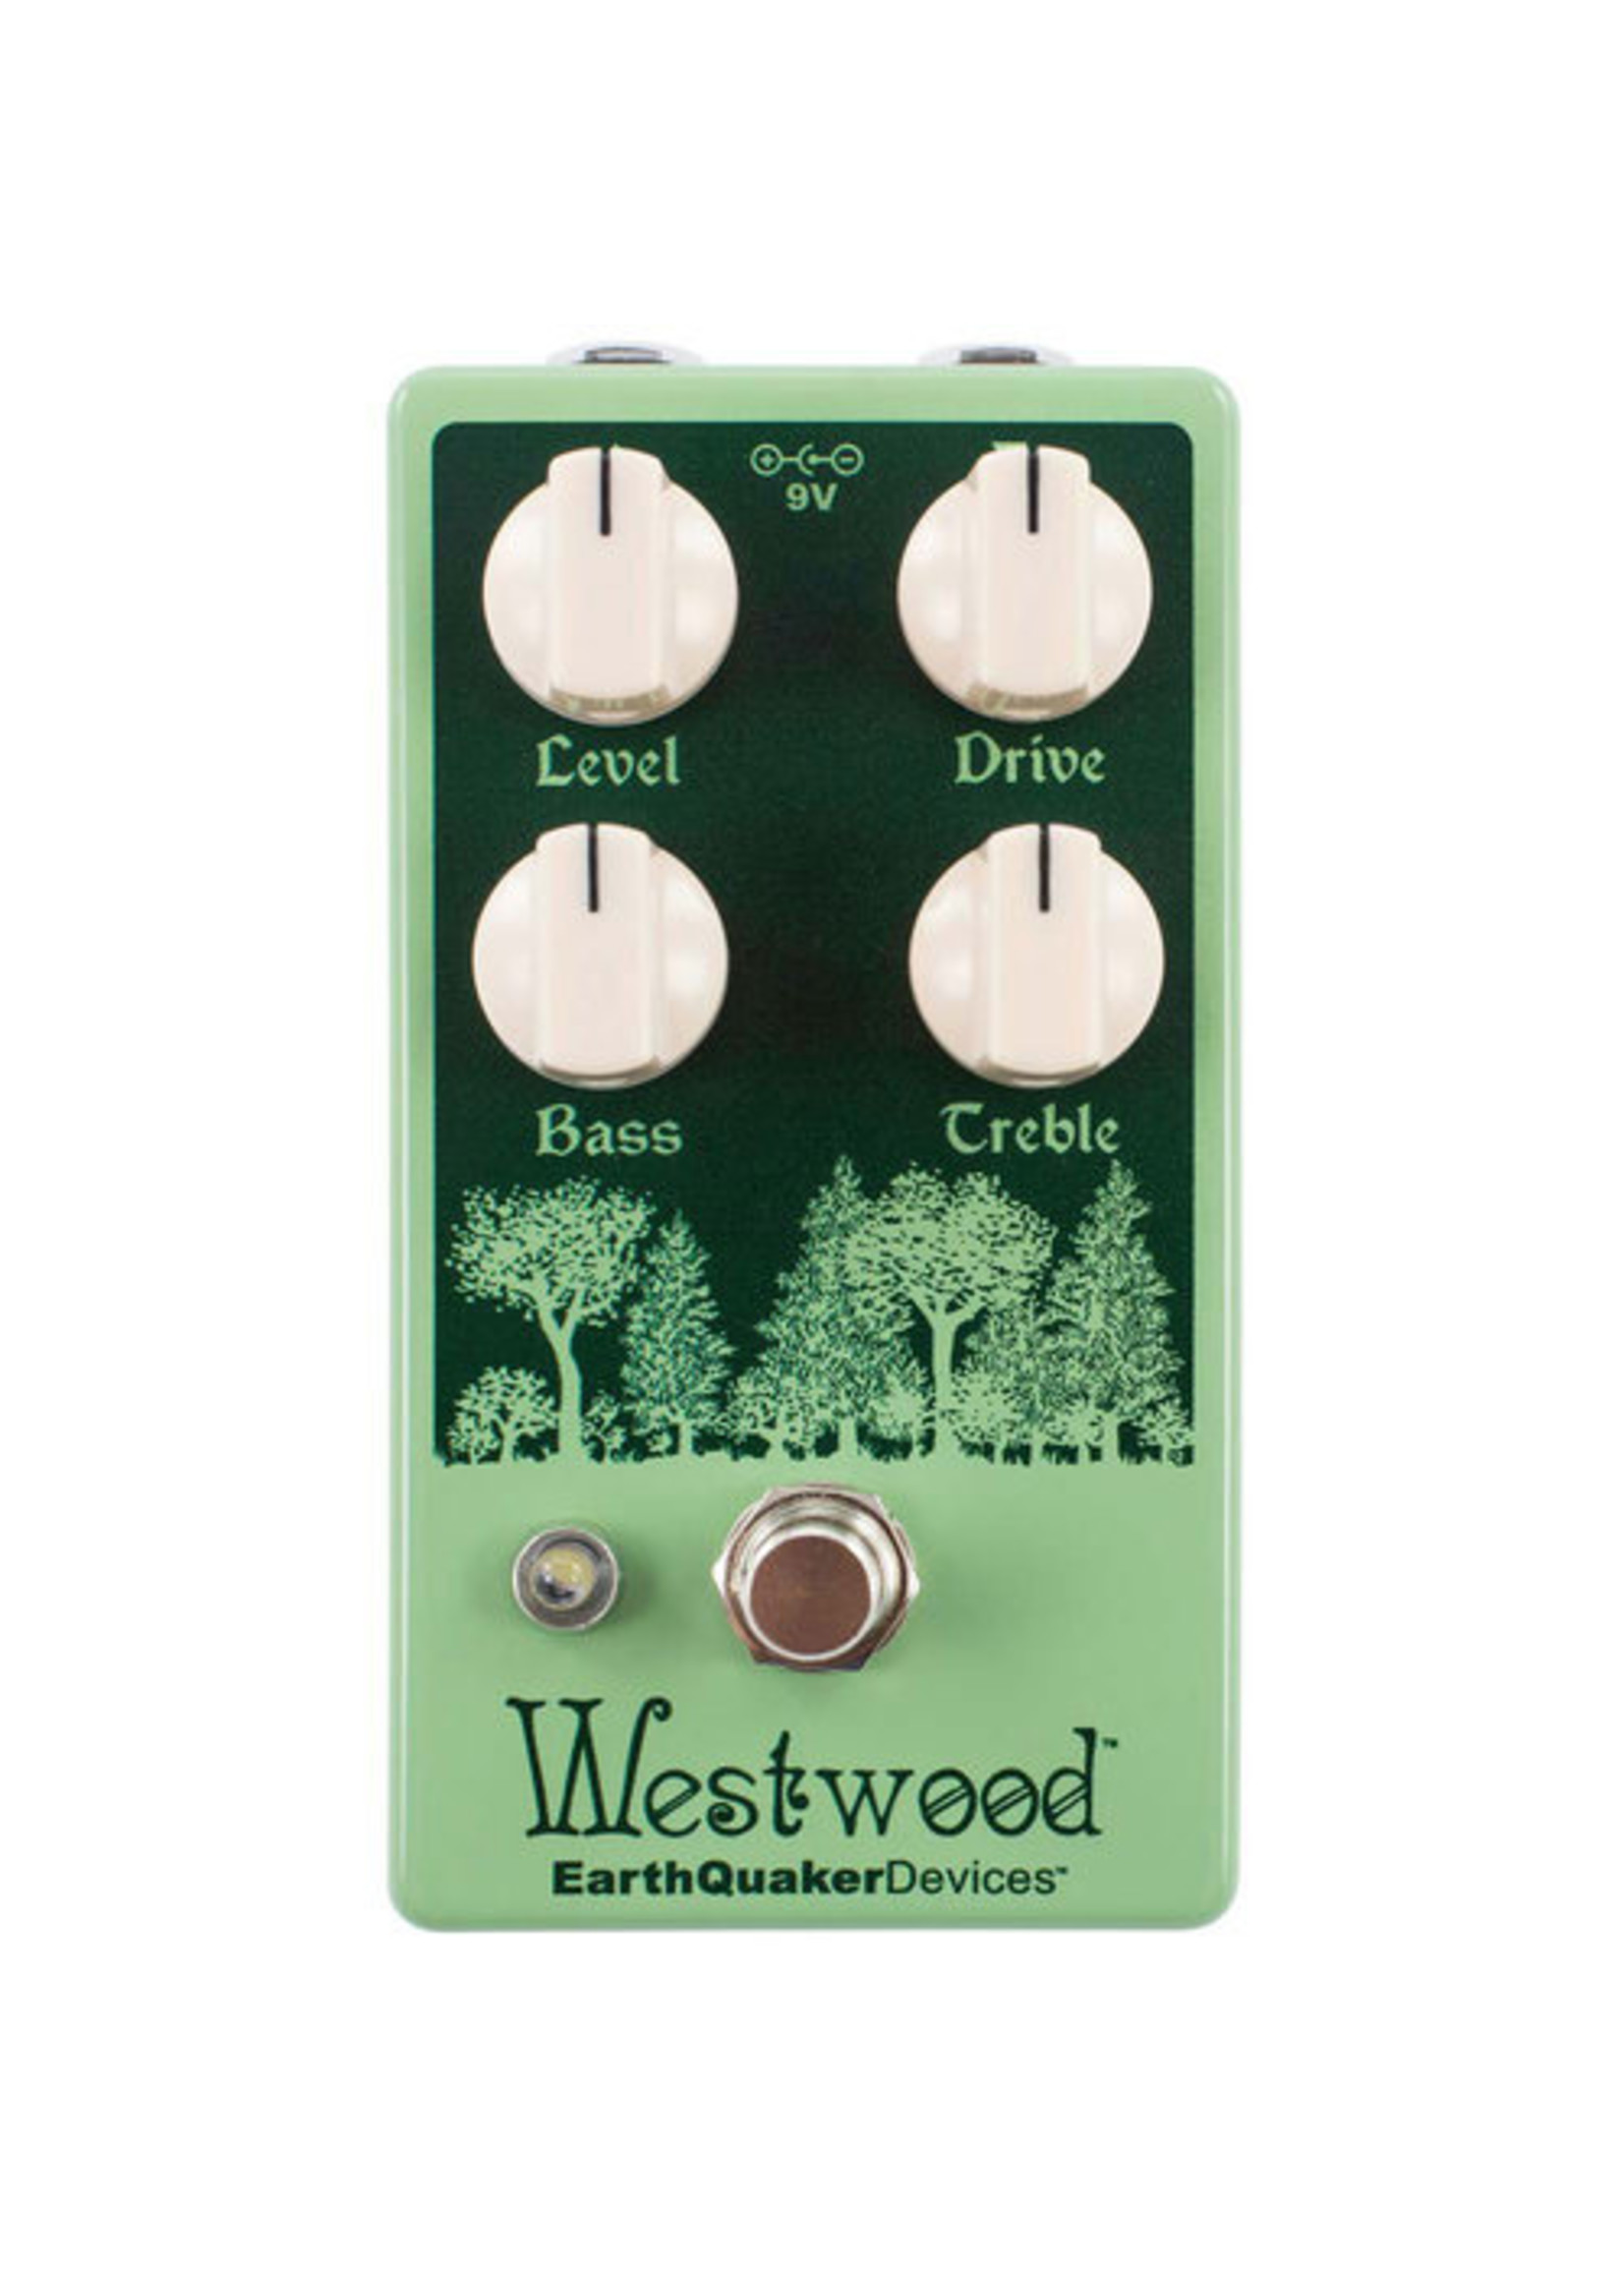 Earthquaker Devices EarthQuaker Devices Westwood